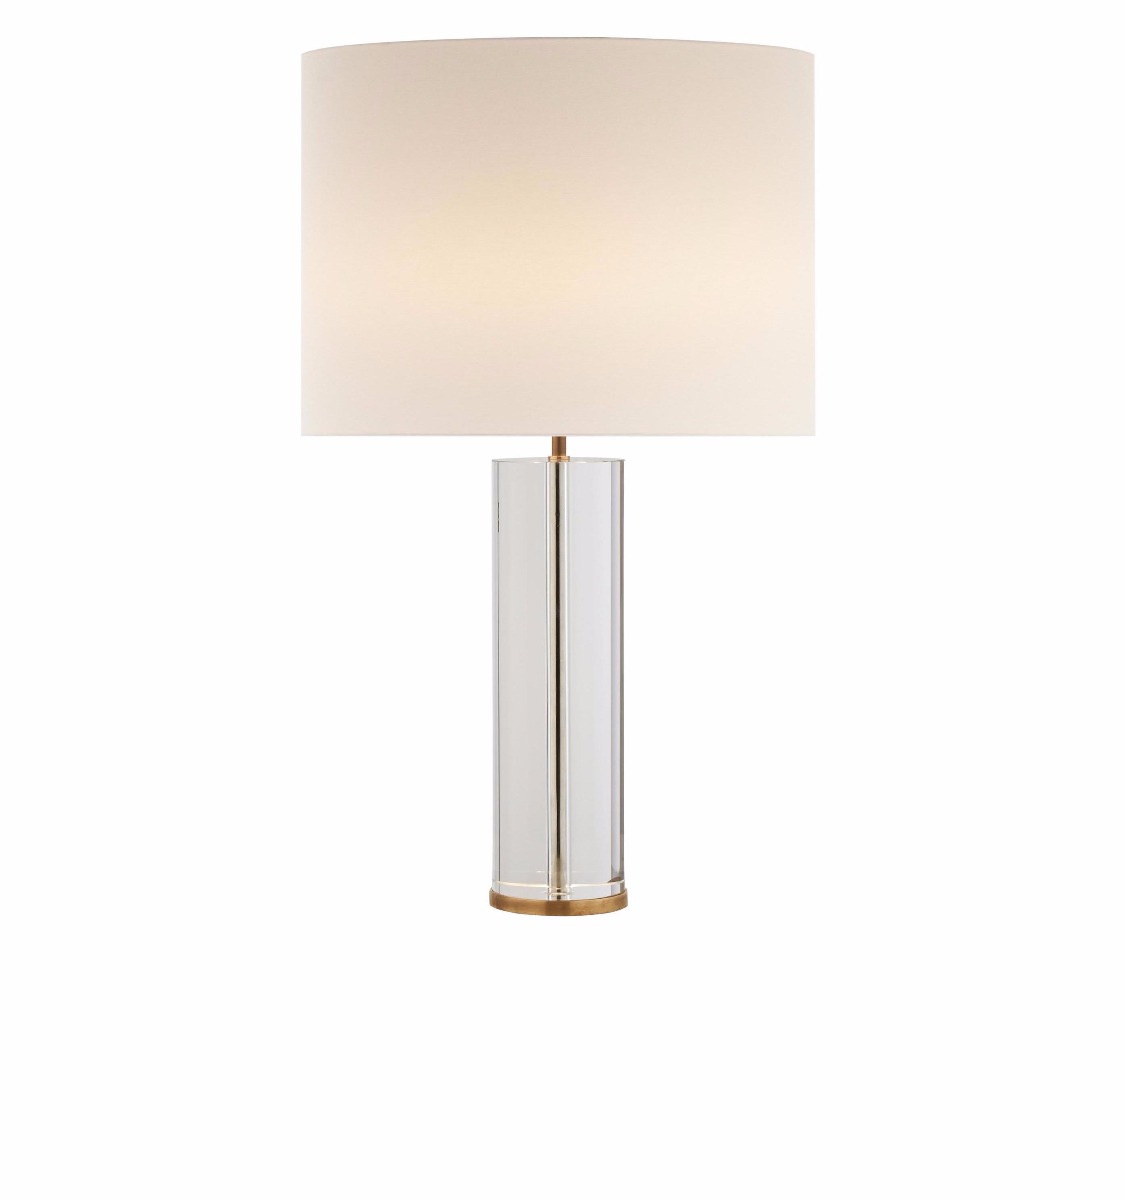 Luxury mirrored stand table lamp by Luxuria London